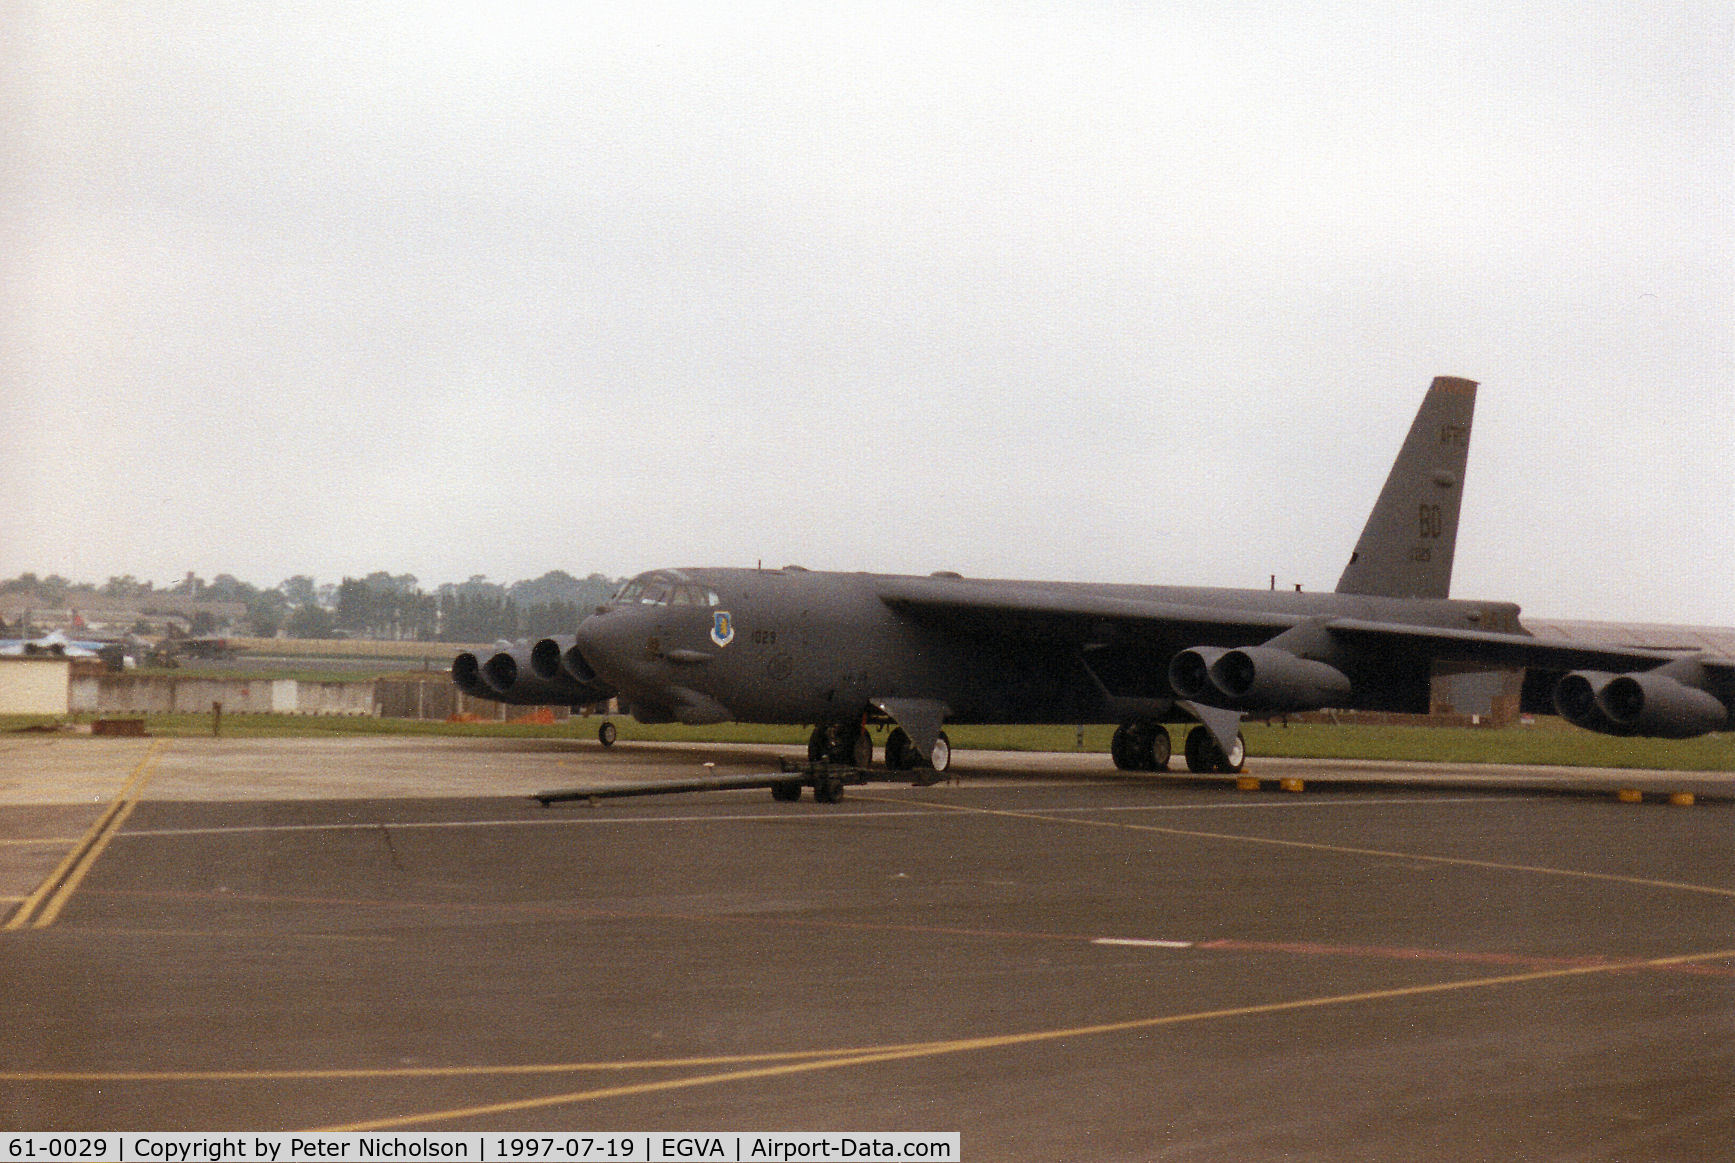 61-0029, 1961 Boeing B-52H Stratofortress C/N 464456, B-52H Stratofortress, callsign Scalp 11, of 93rd Bombardment Squadron at Barksdale AFB on the flight-line at the 1997 Intnl Air Tattoo at RAF Fairford.